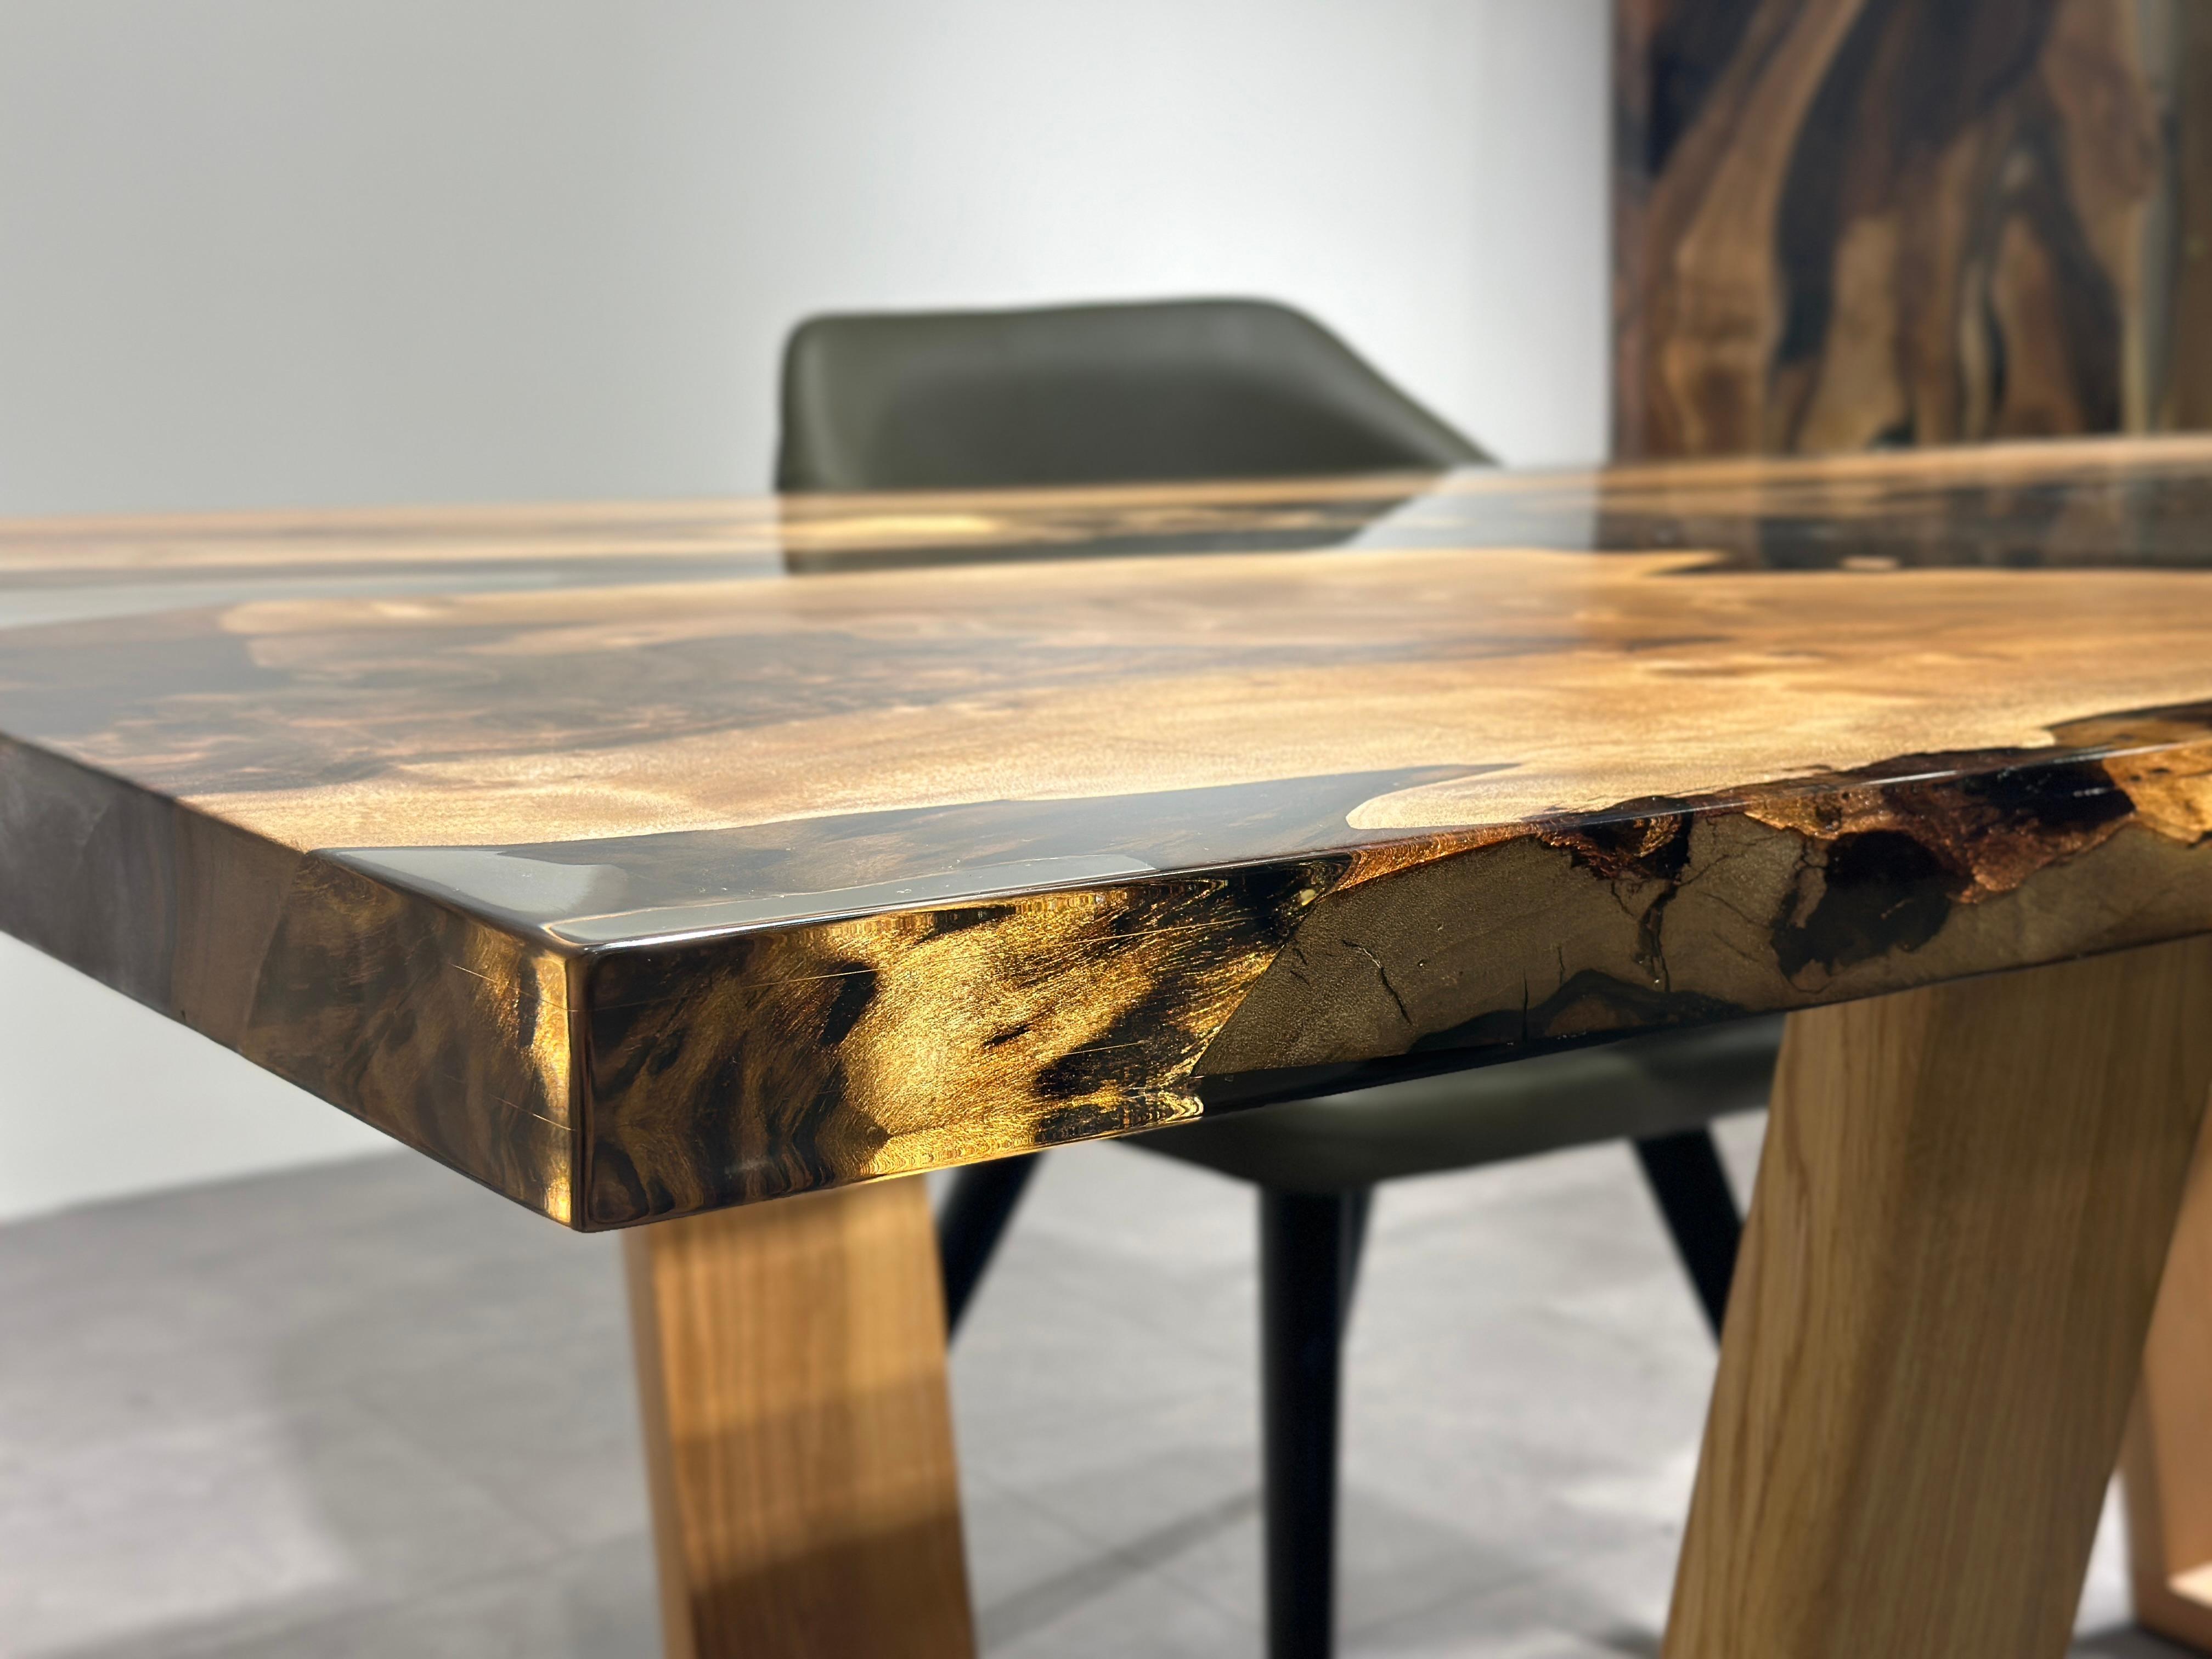 Transparent Epoxy Resin Walnut Table

This table is made of walnut wood & black transparent epoxy. 

Custom sizes, colours and finishes are available!